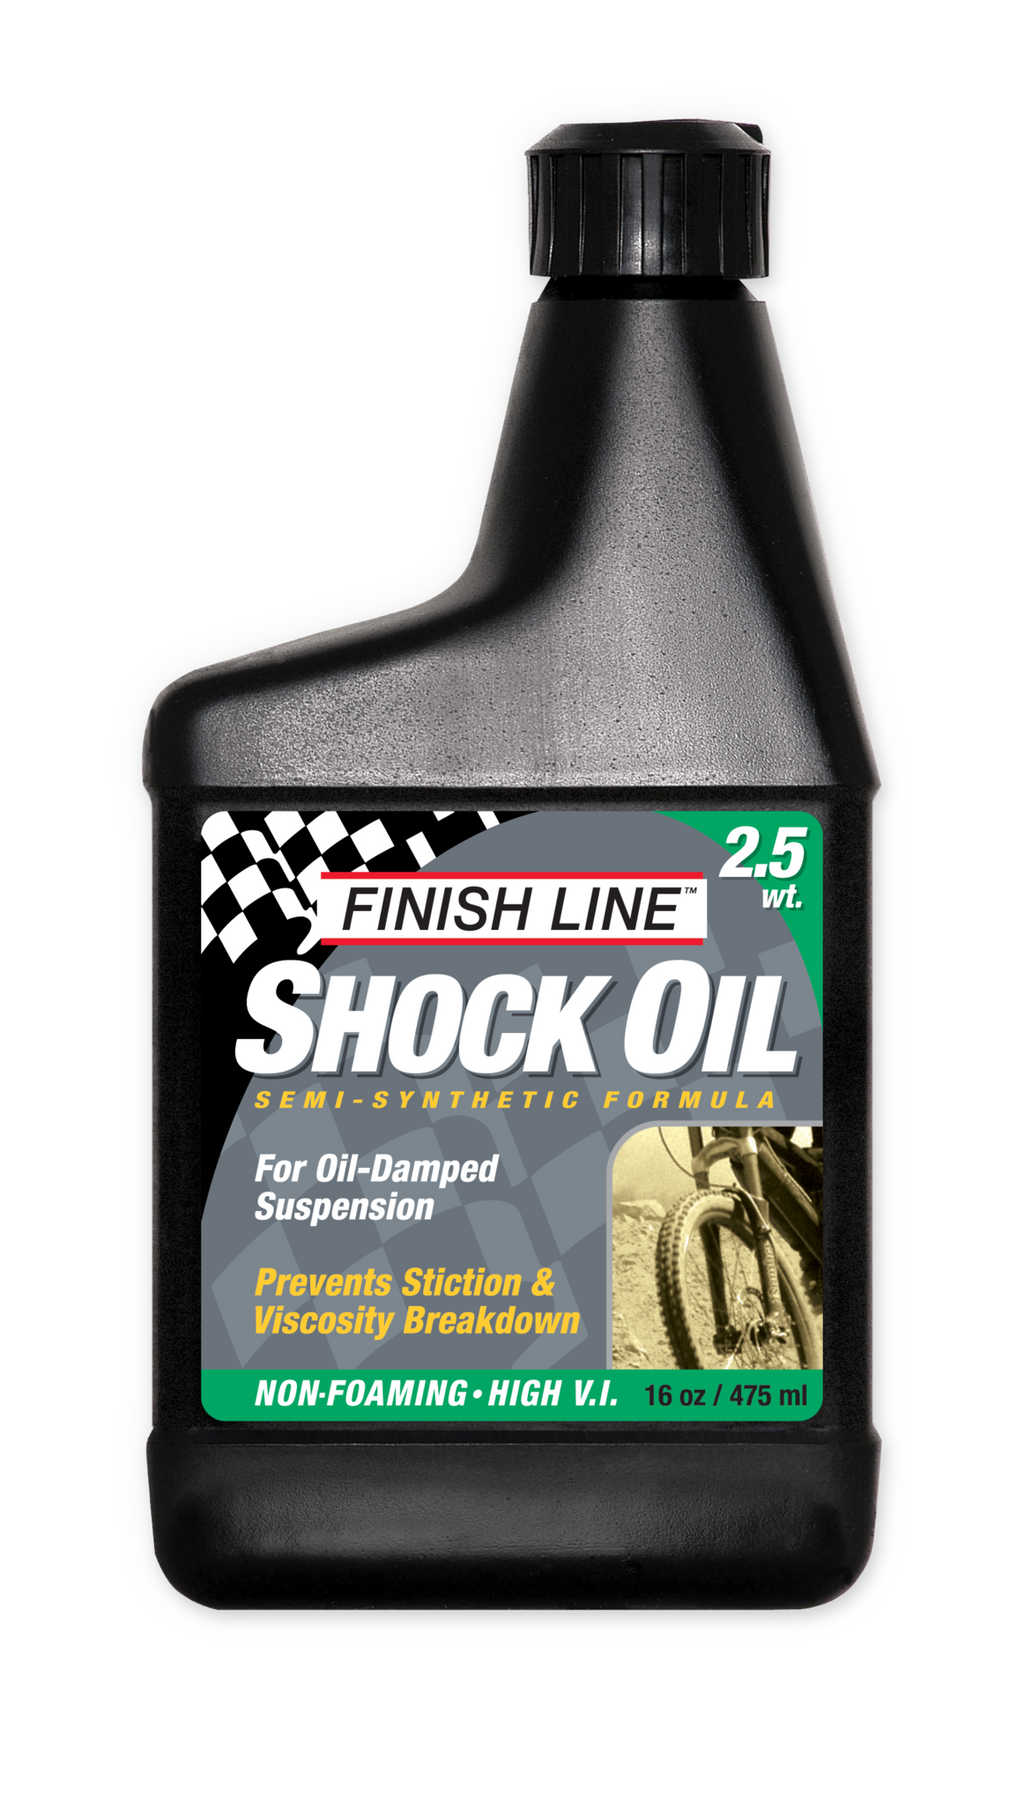 Finish Line Shock Oil 2.5 Weight (2.5wt), 16oz